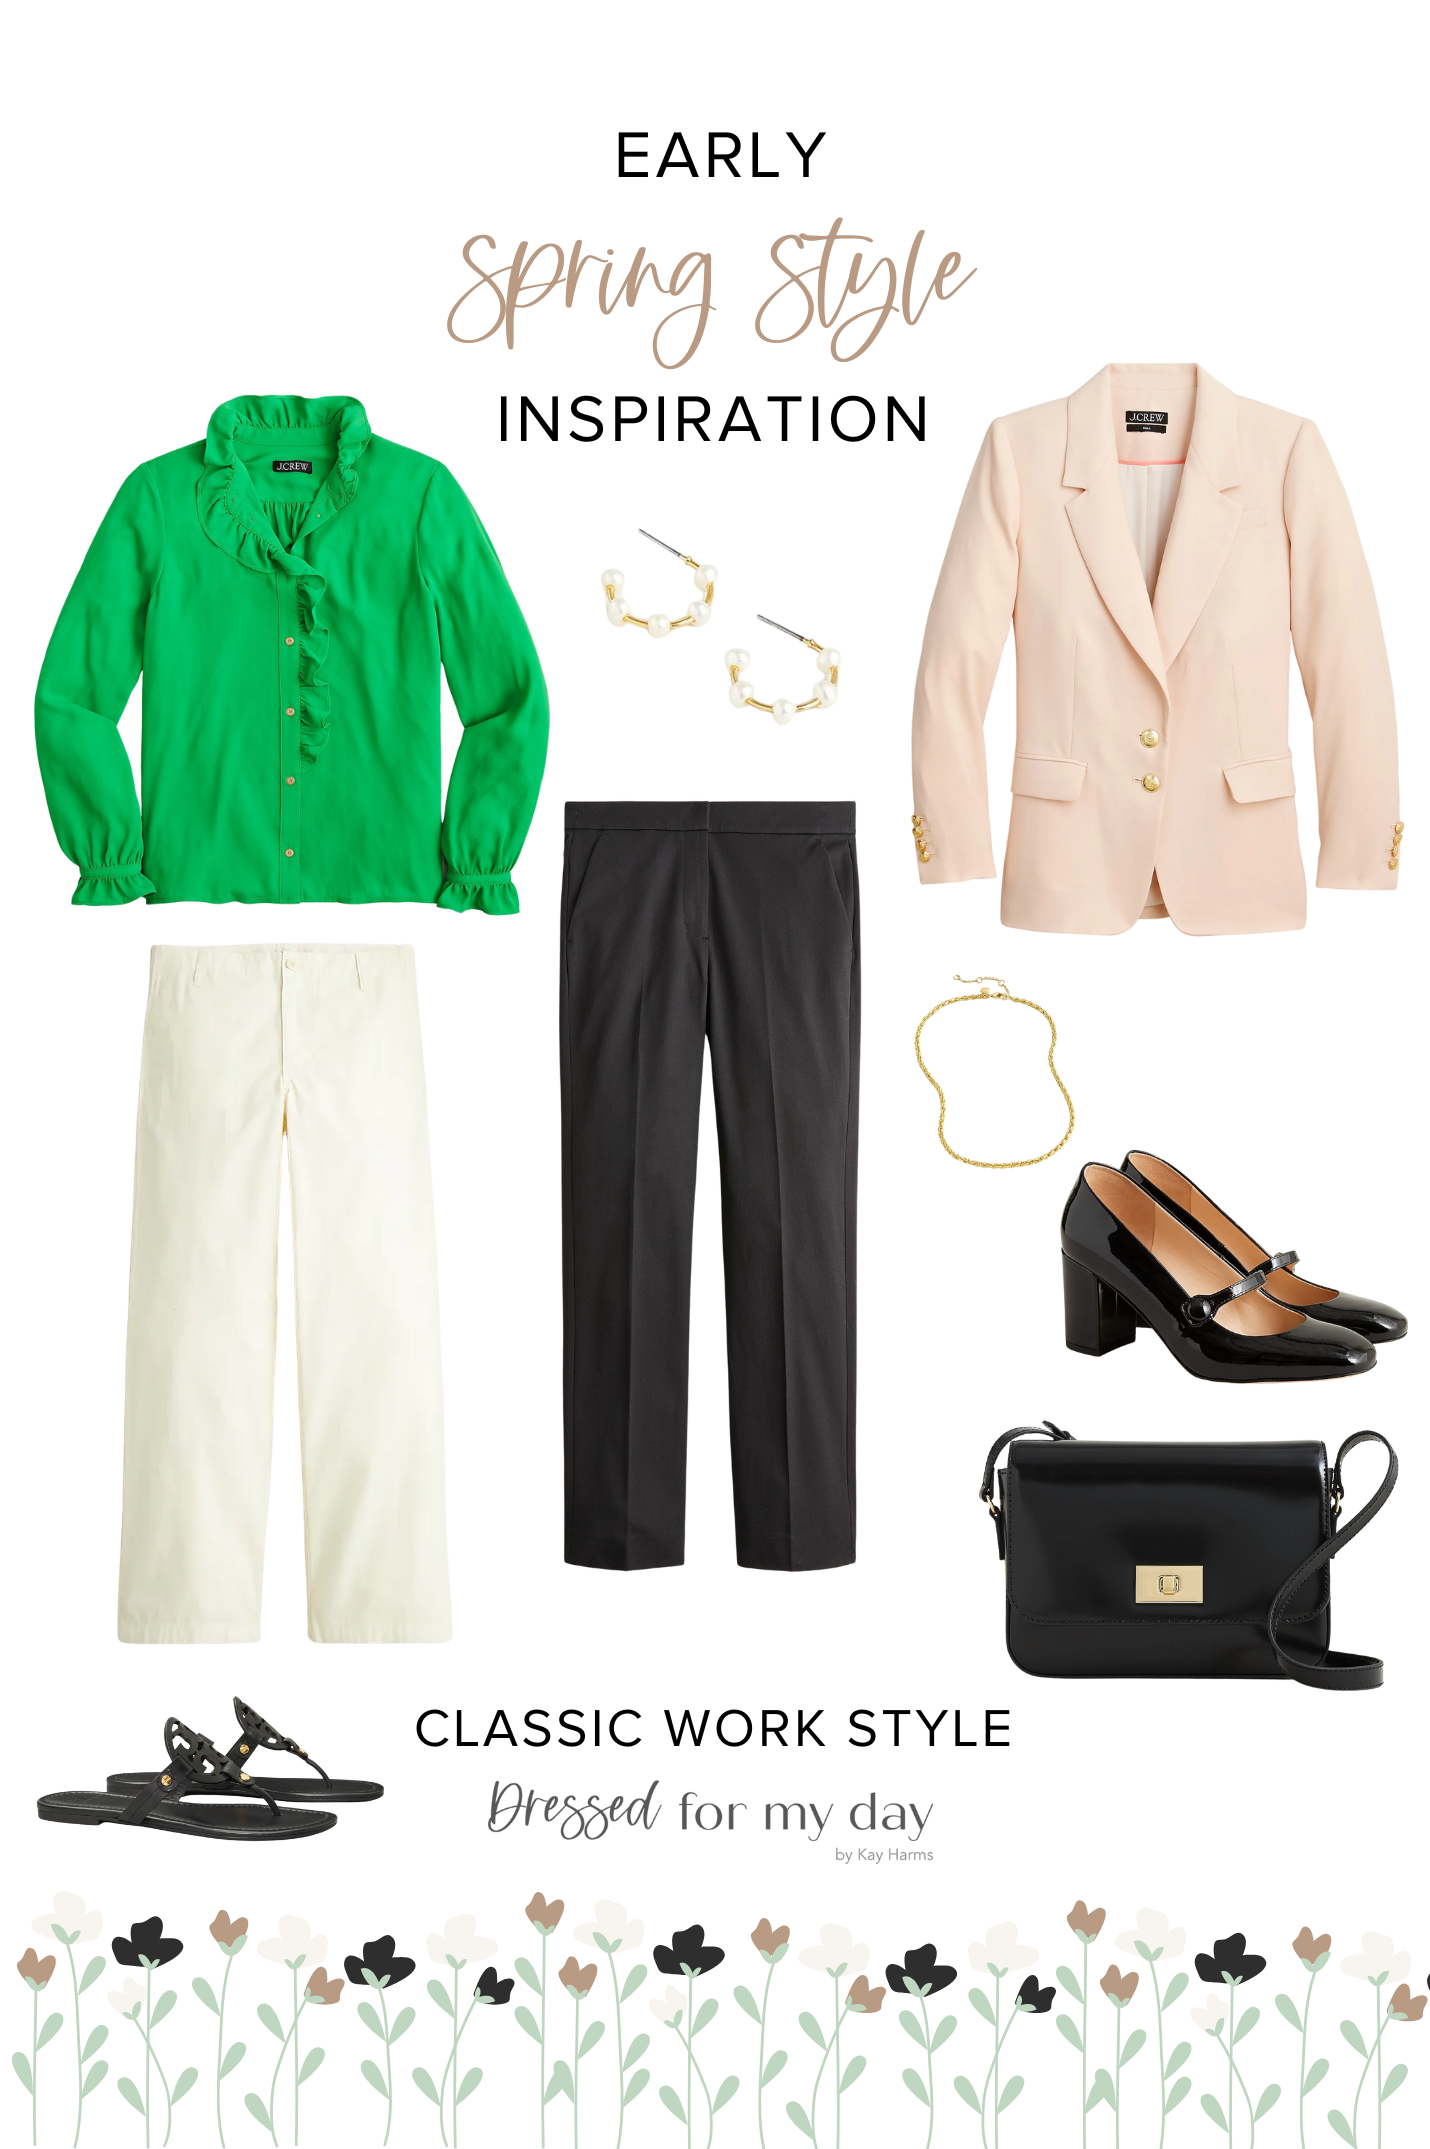 Early Spring Style Inspiration from J.Crew